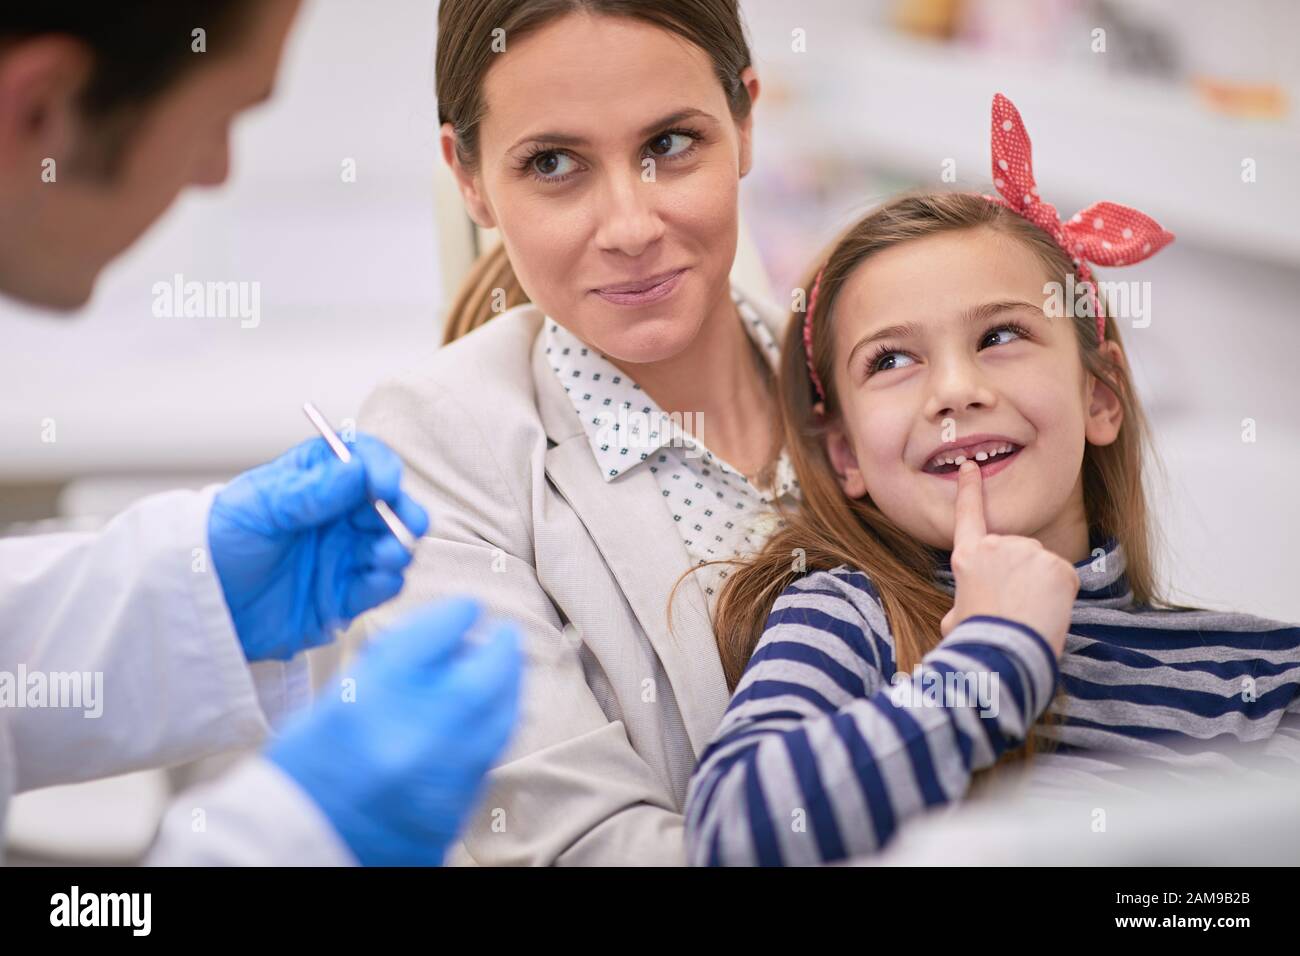 Mom and dentist trying to convince sweet little girl to do a dental exam, dentist patient concept Stock Photo